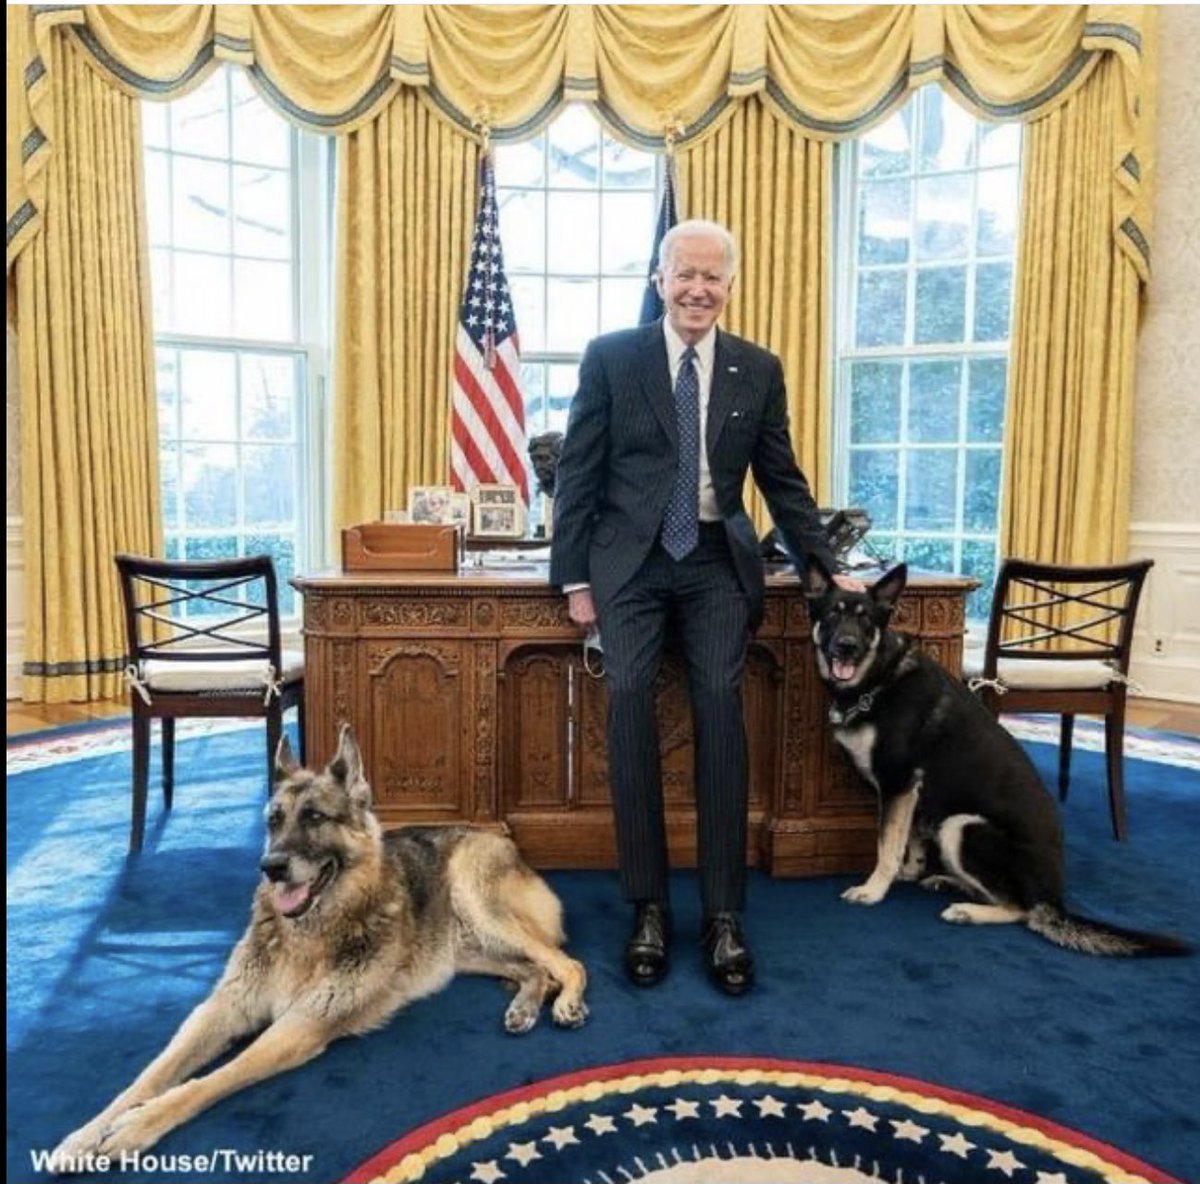 Champ and Major look like great examples of “Presidential dogs” to me. 🇺🇸